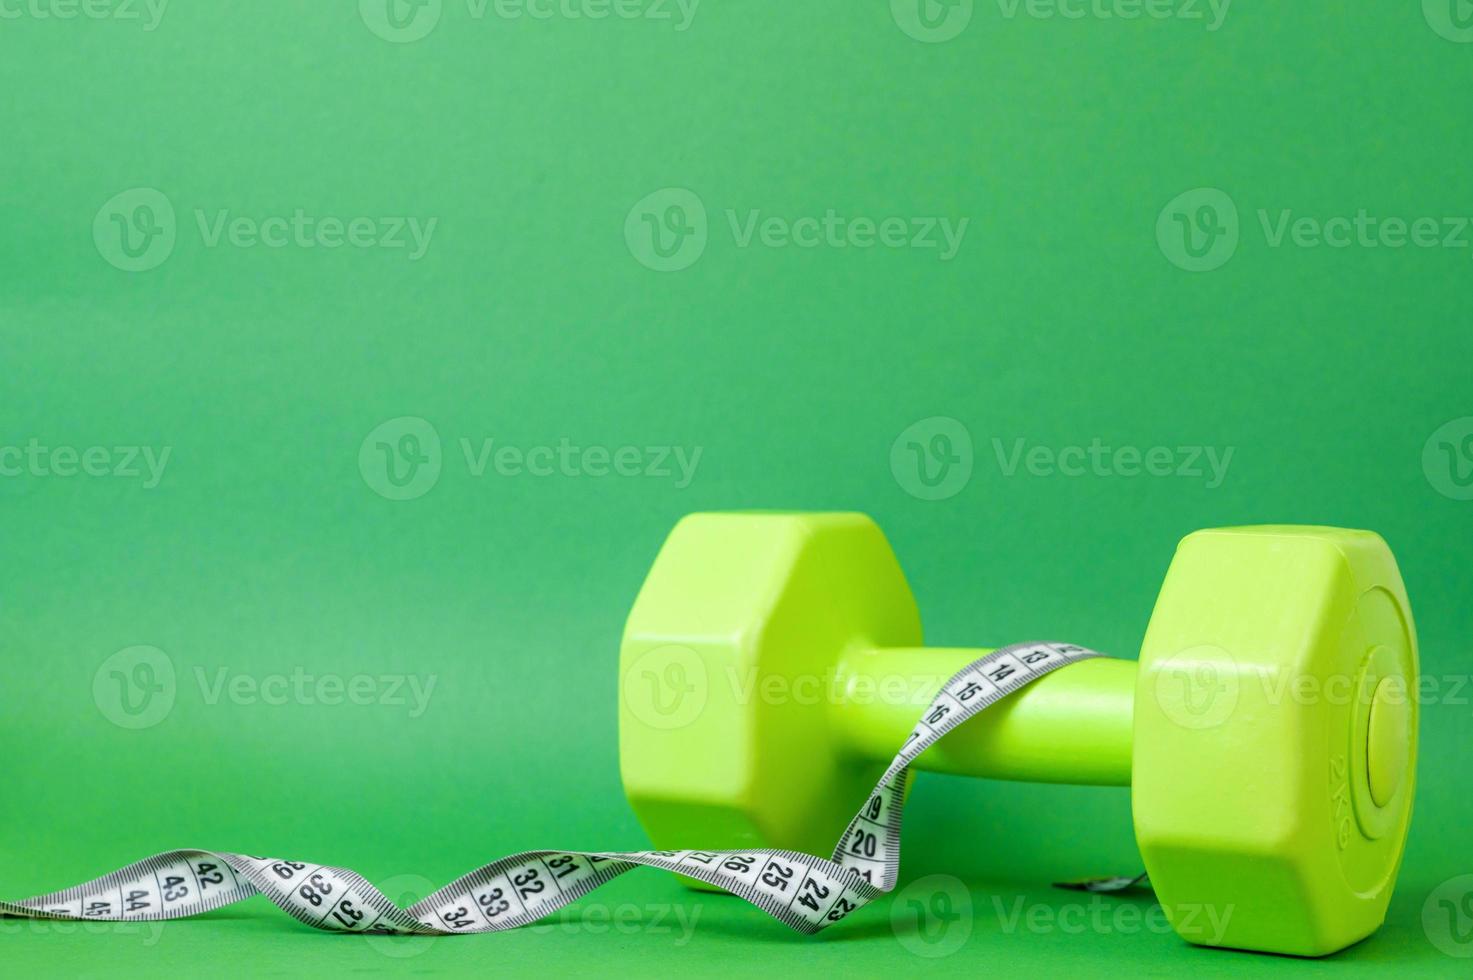 Workouts and fitness concept. Healthy lifestyle. Green dumbbells and measuring tape photo